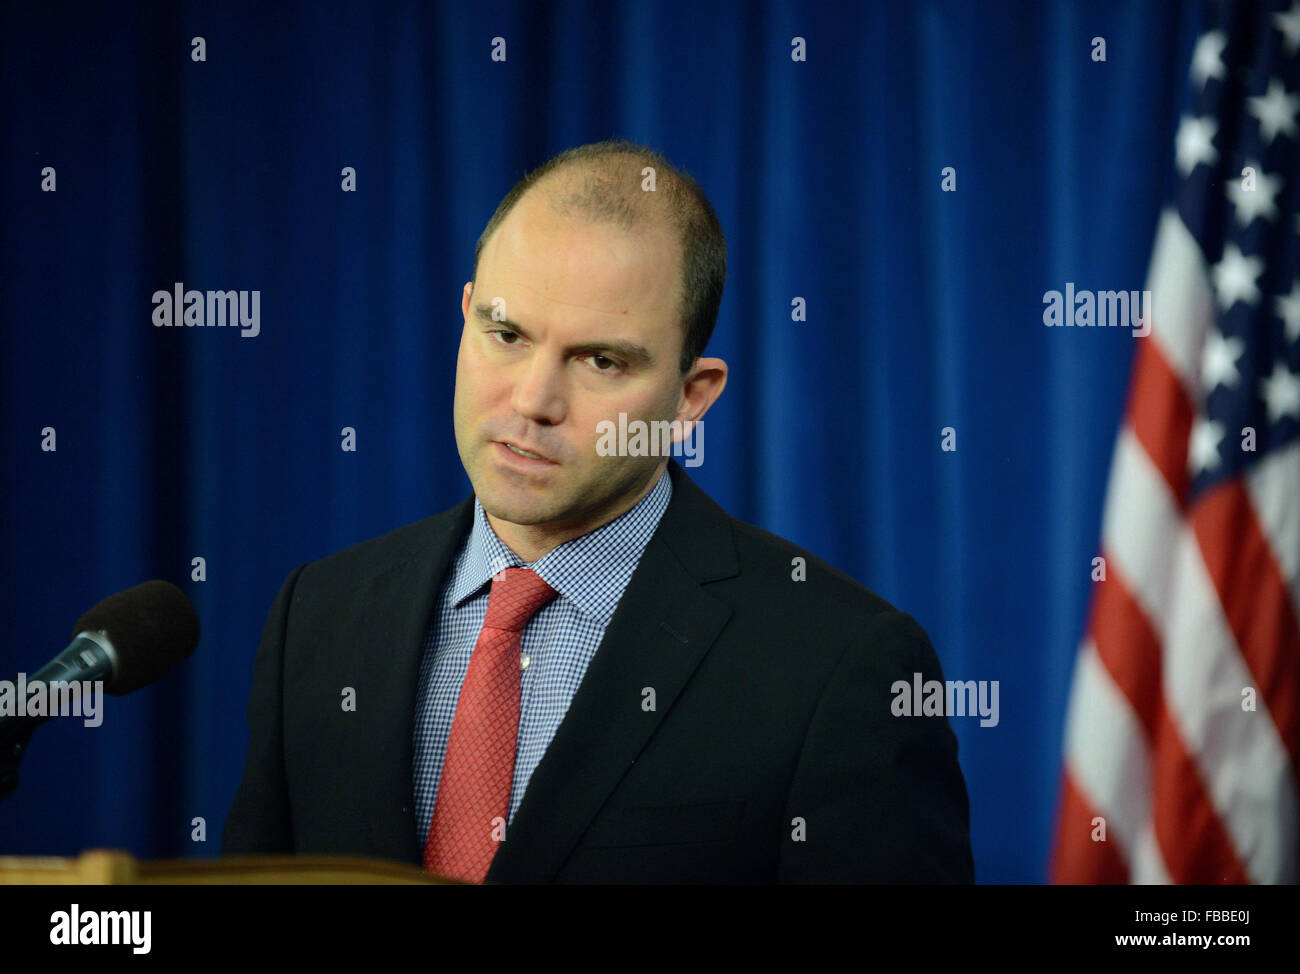 (160114)-- WASHINGTON D.C., Jan. 14, 2016 (Xinhua) -- White House Deputy National Security Advisor for Strategic Communications Ben Rhodes speaks during a press briefing at the Foreign Press Center in Washington, DC, the United States, Jan. 13, 2016. (Xinhua/Jiao Min) Stock Photo